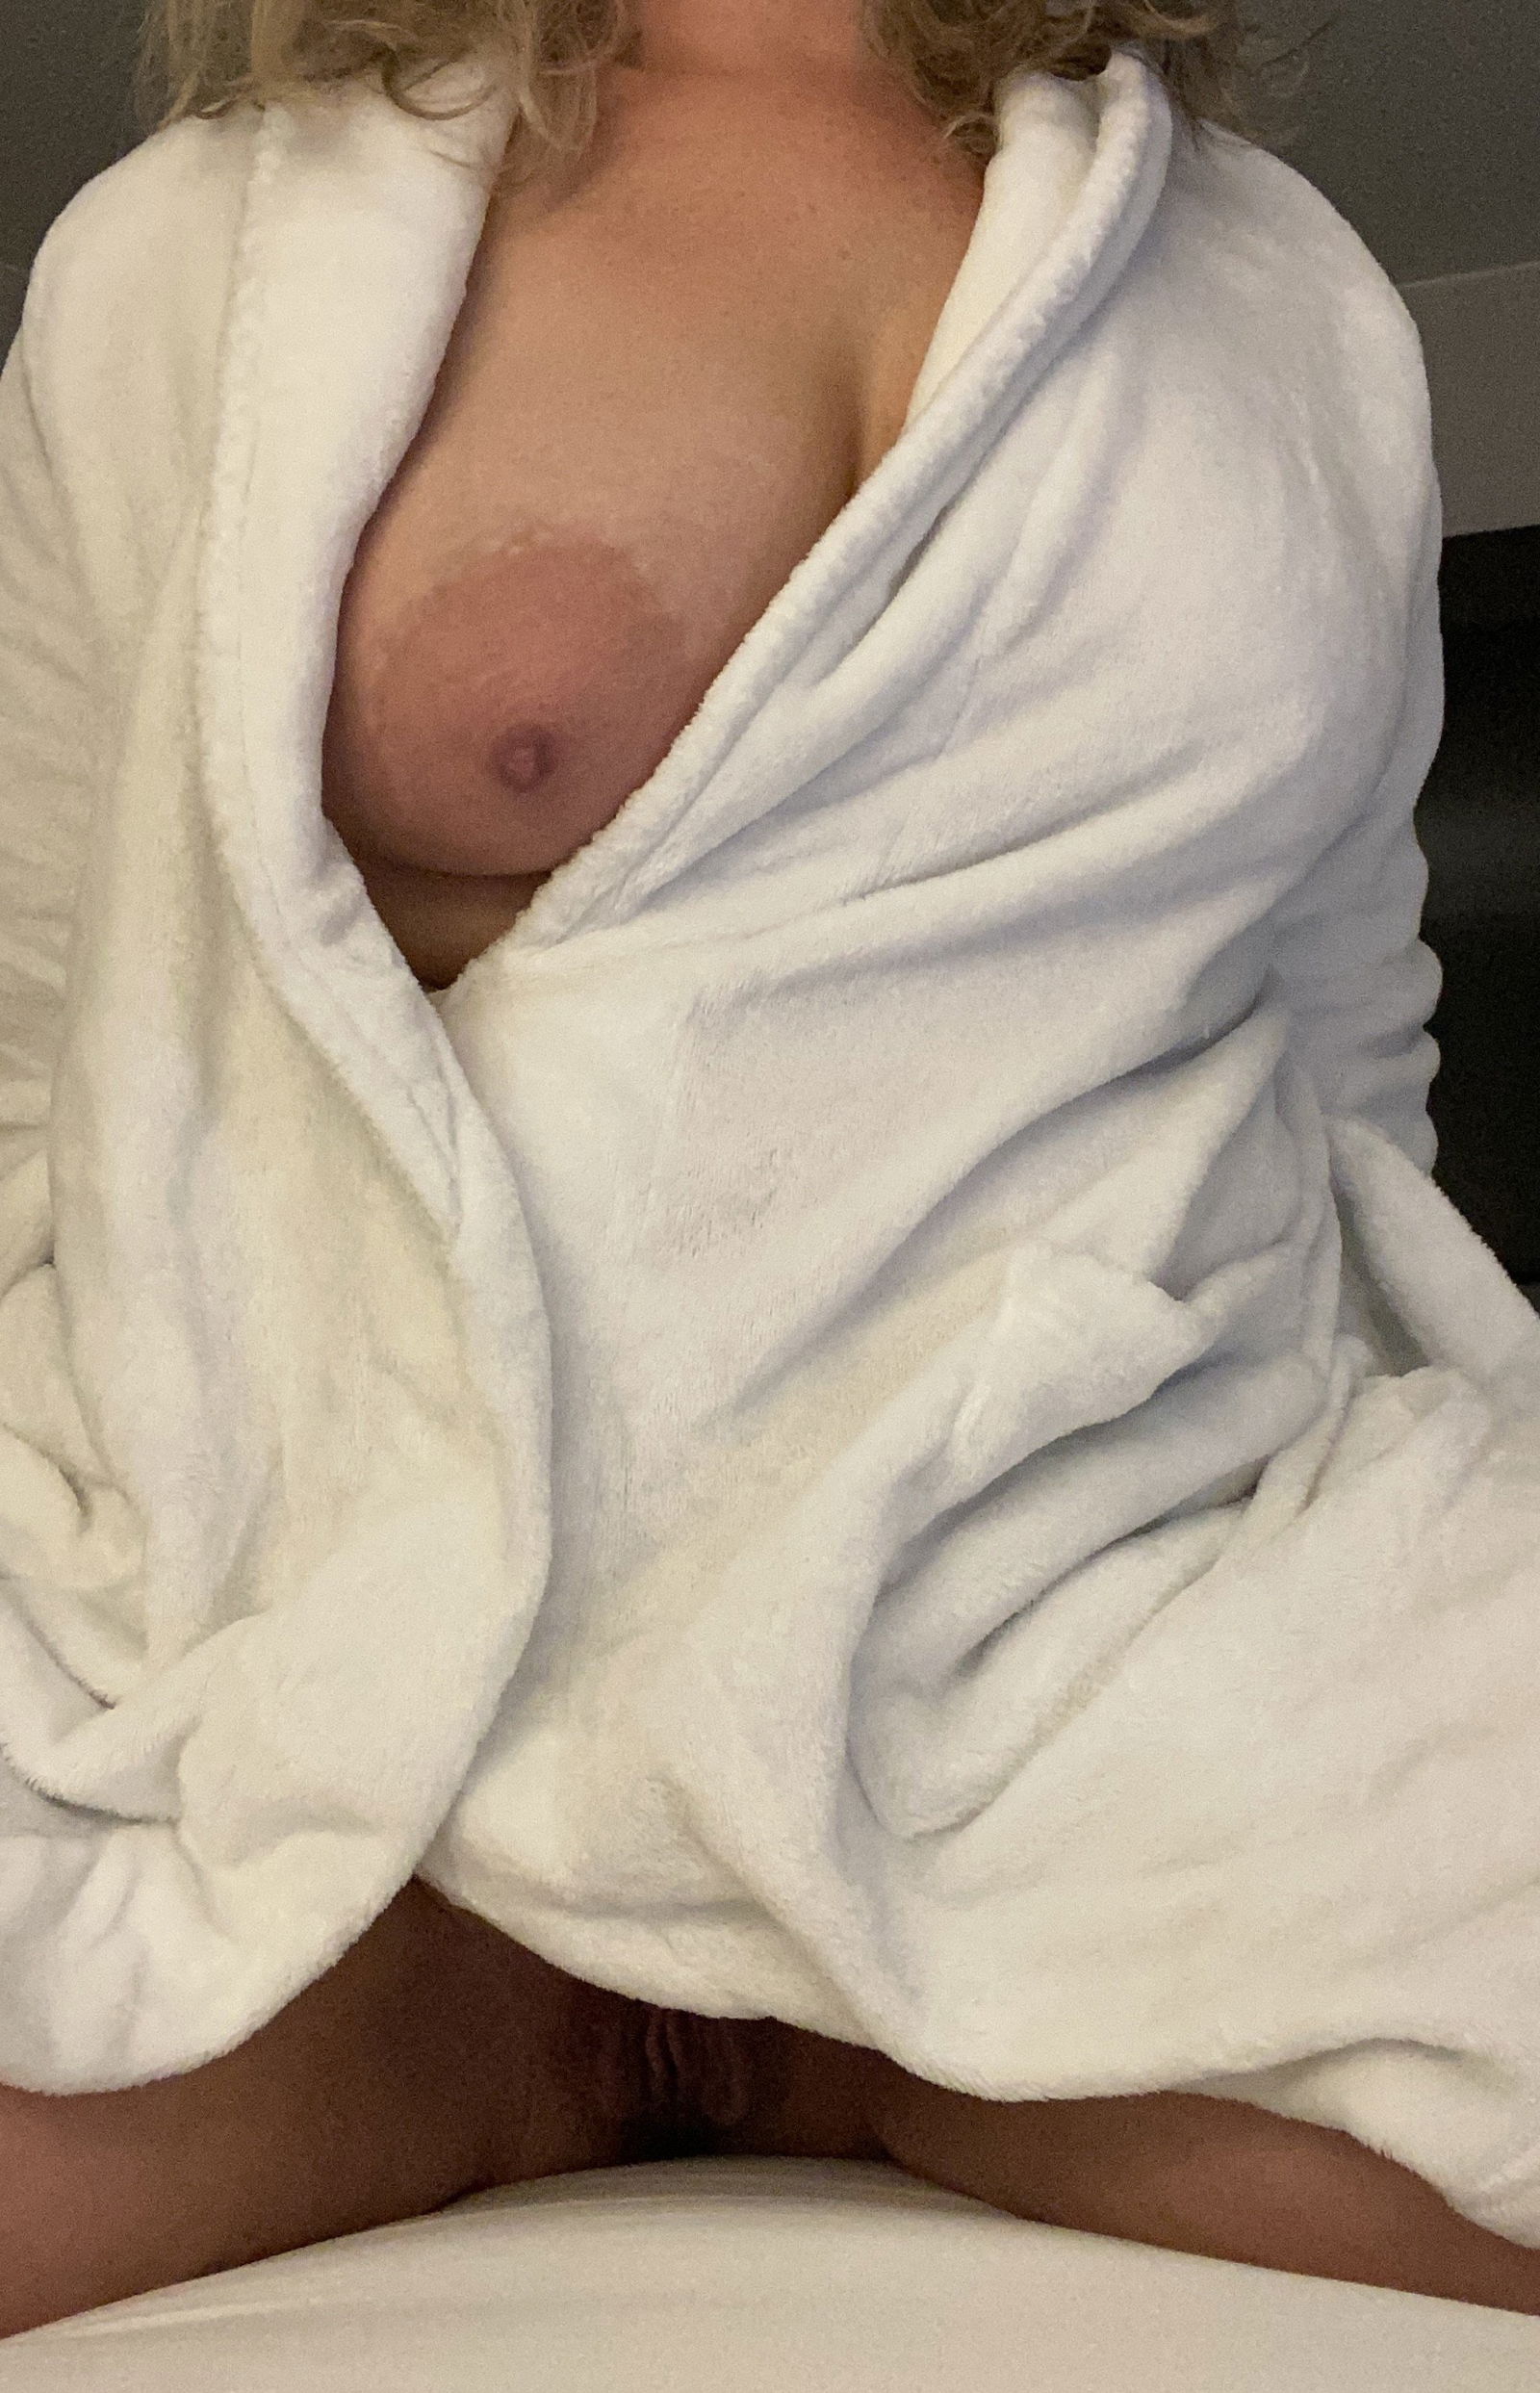 Photo by MsLillith with the username @MsLillith,  May 12, 2022 at 3:19 AM. The post is about the topic Big Soft Squishy Natural Titties and the text says 'Hotel pics!'